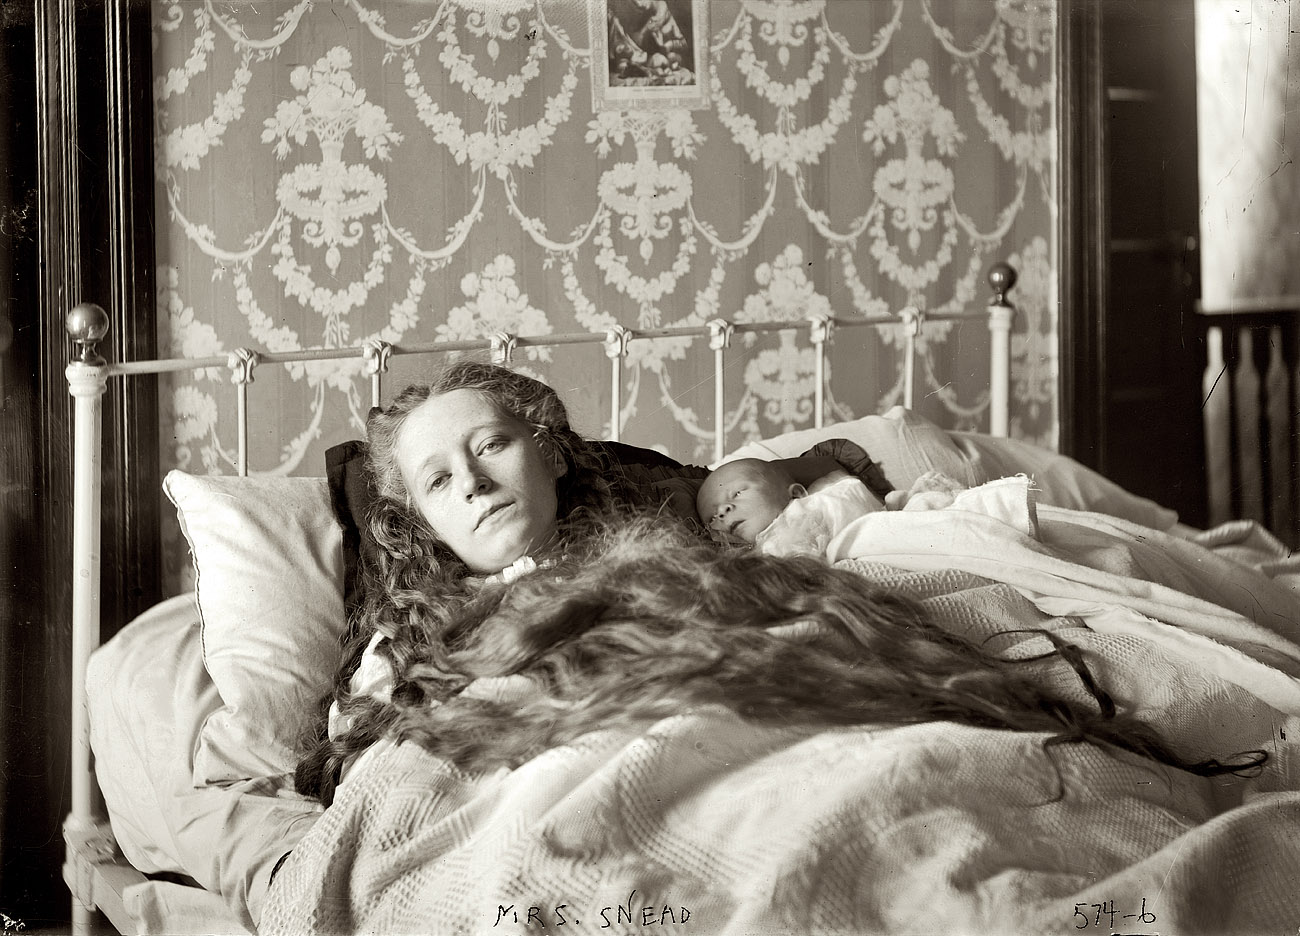 "Mrs. Ocey Snead, in bed, baby in arms," December 1907 or January 1908. 5x7 glass negative, George Grantham Bain Collection. View full size. Ocey, who was found dead in an East Orange, New Jersey, bathtub in November 1909, drugged and emaciated, was at the center of scandalous murder case involving her mentally unbalanced mother and a spinster aunt who starved herself to death while awaiting trial. Along with a third sister they were thought to have conspired to drug and starve Ocey to collect $32,000 in insurance money. Ocey had two children, one of whom died in infancy. (Coverage in the New York Times noted the discovery of small bones in the furnace at a building where Ocey lived -- a Brooklyn tenement dubbed "house of mystery" and "baby farm" by the neighbors.) One part of the mystery is how two photographs of Ocey, very much alive, ended up in Bain News Service collection of glass negatives at the Library of Congress. (The other photo is dated 12-21-07). Are they are family photos obtained in the course of covering the trial of the sisters? Or is there some reason GGB would have photographed Ocey well before she died? (Cue organ music.)